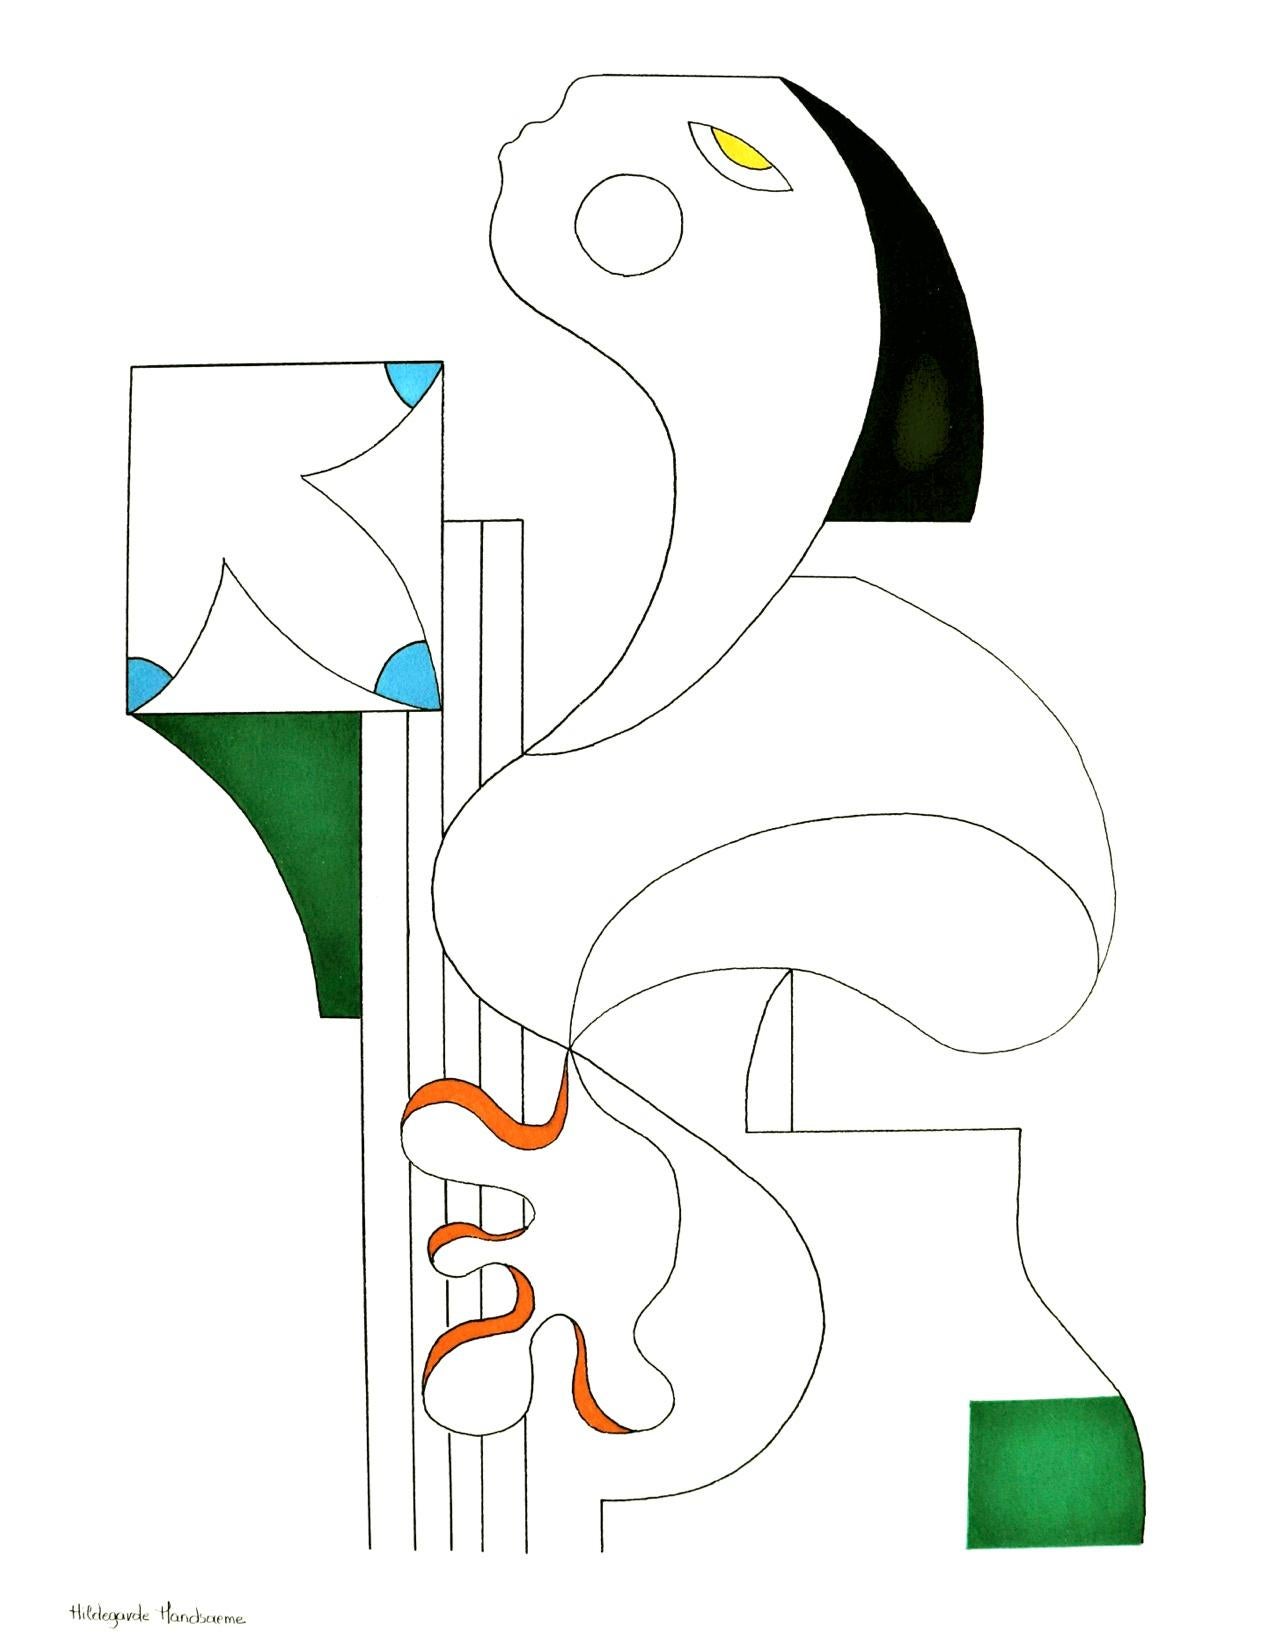 'L'Artiste Musicale' by Hildegarde Handsaeme is a minimalist ink portrait drawing with soft lines, cubism style, and vibrant accents. Wonderful abstract artwork, suitable for various interiors. 

It is an original unique art piece that is in